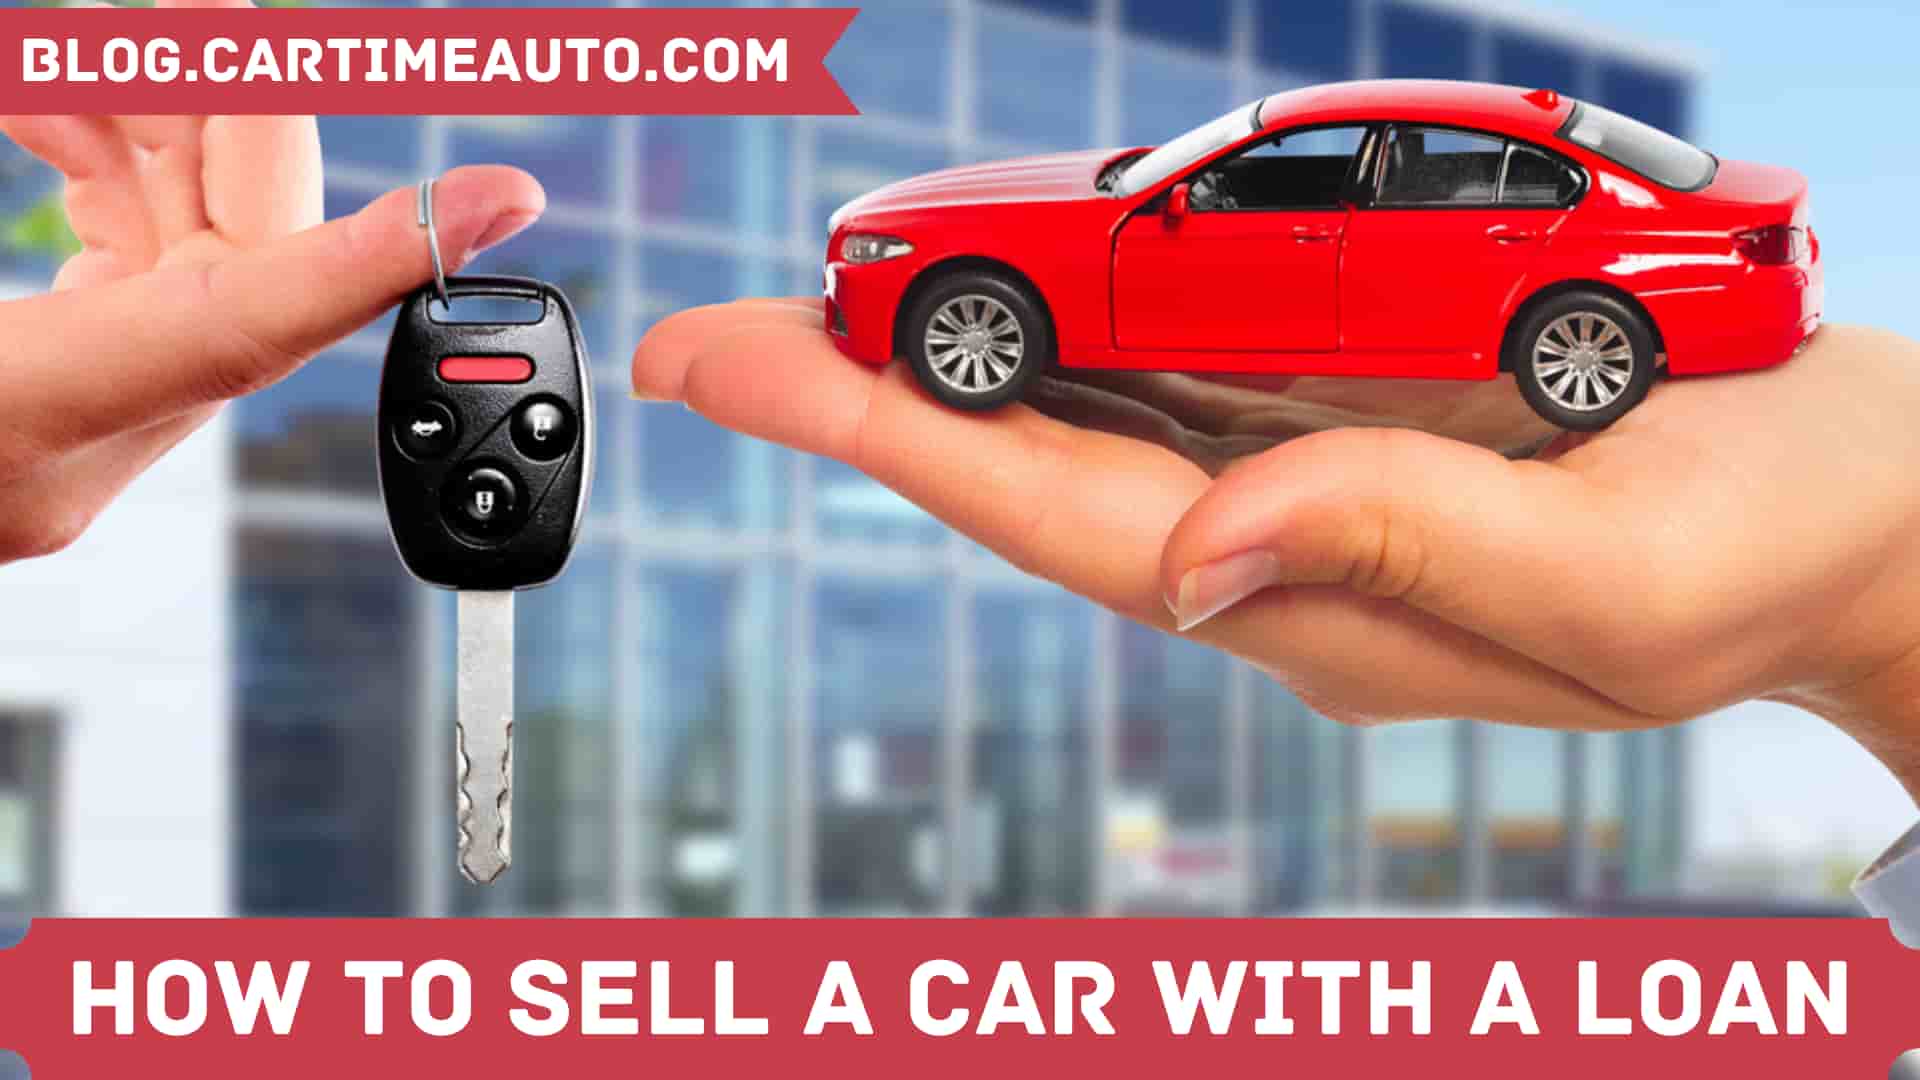 Red car and keys in hand